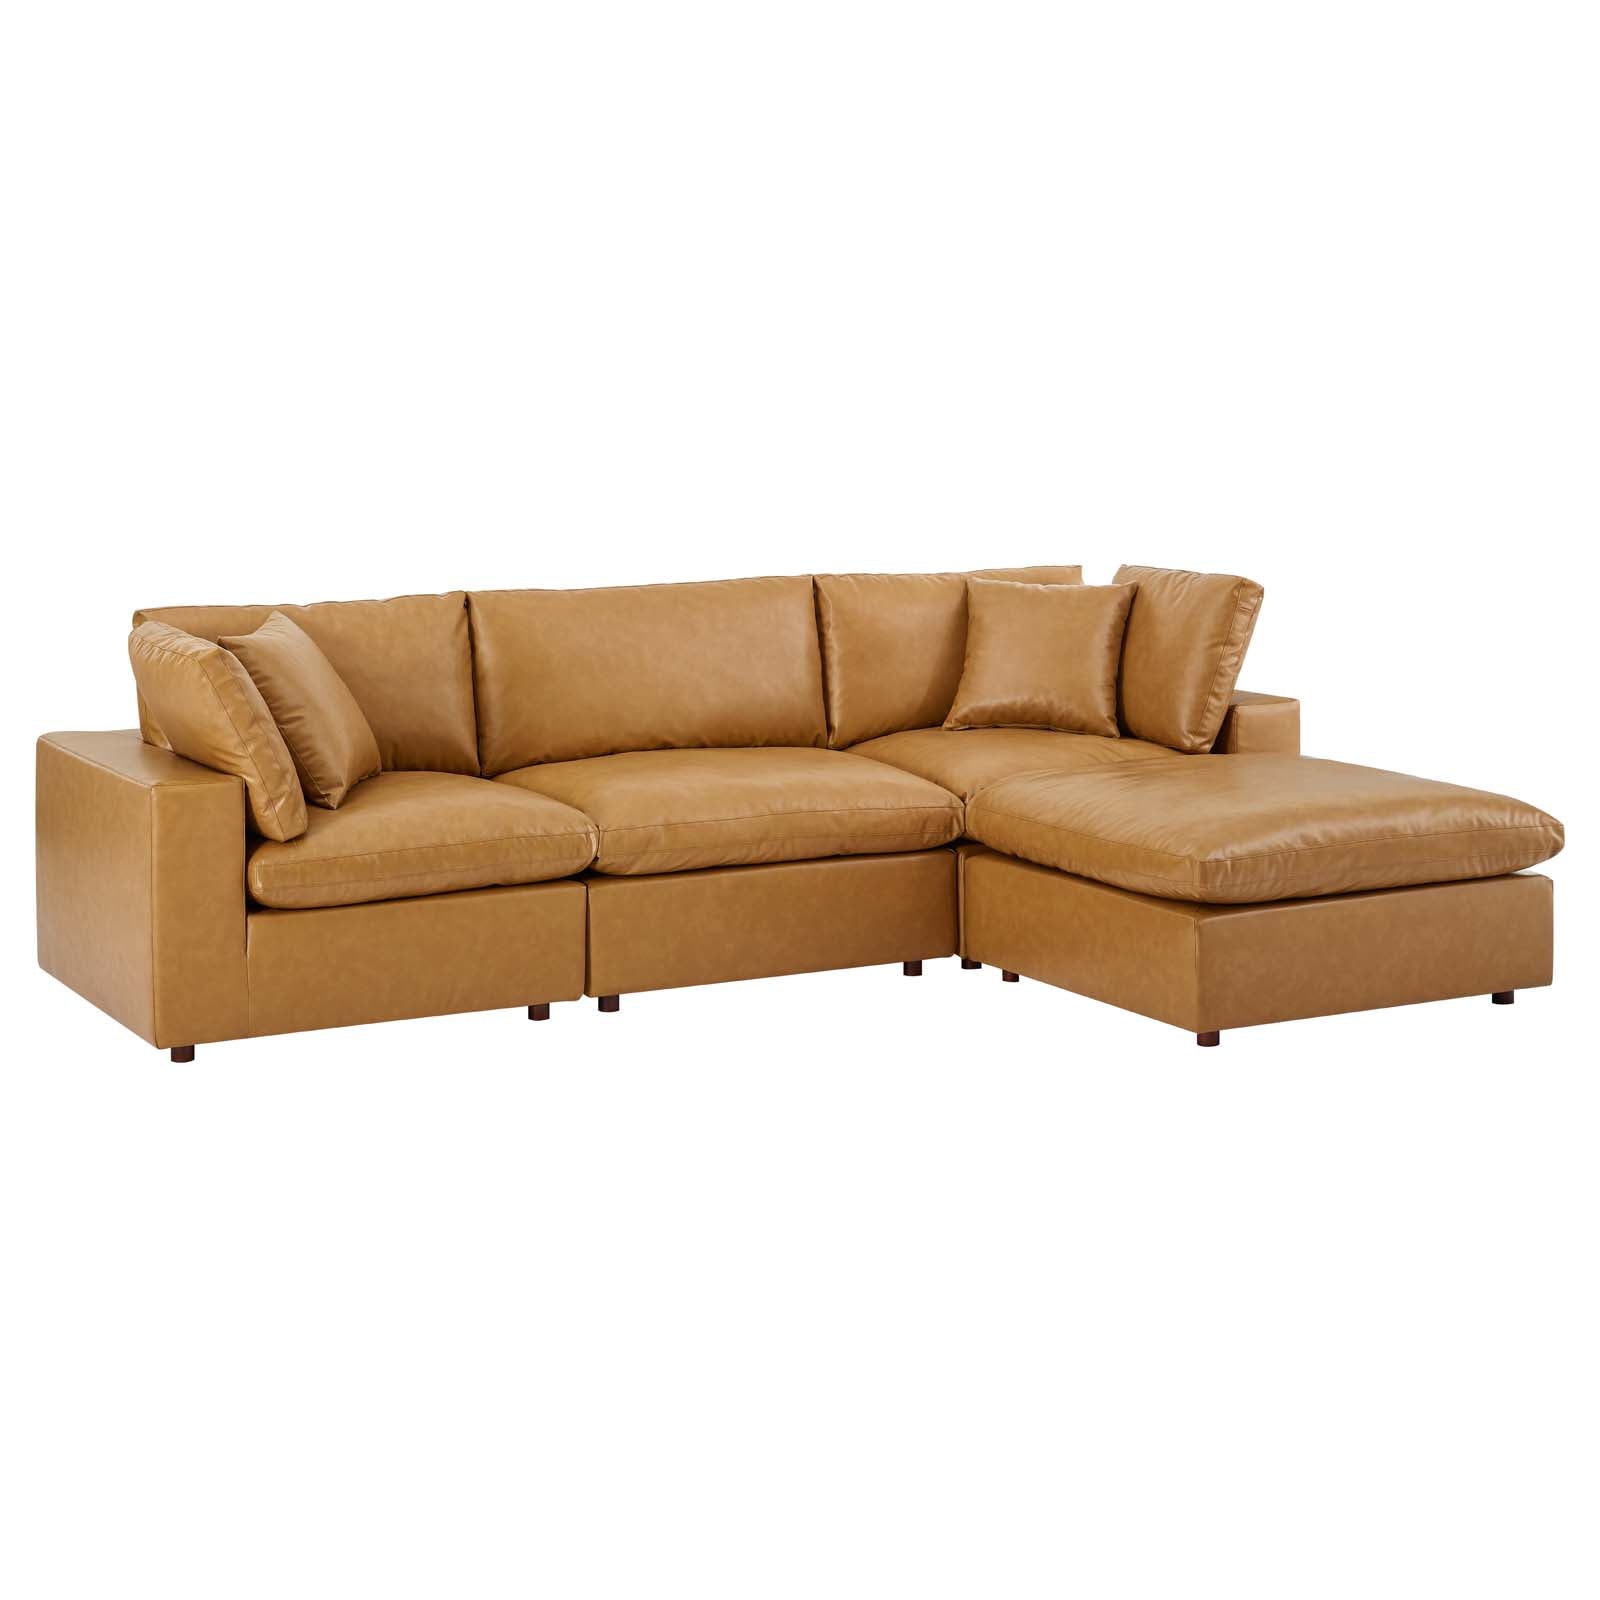 Modway Sectional Sofas - Commix Down Filled Overstuffed Vegan Leather 4 Piece Sectional Sofa Tan